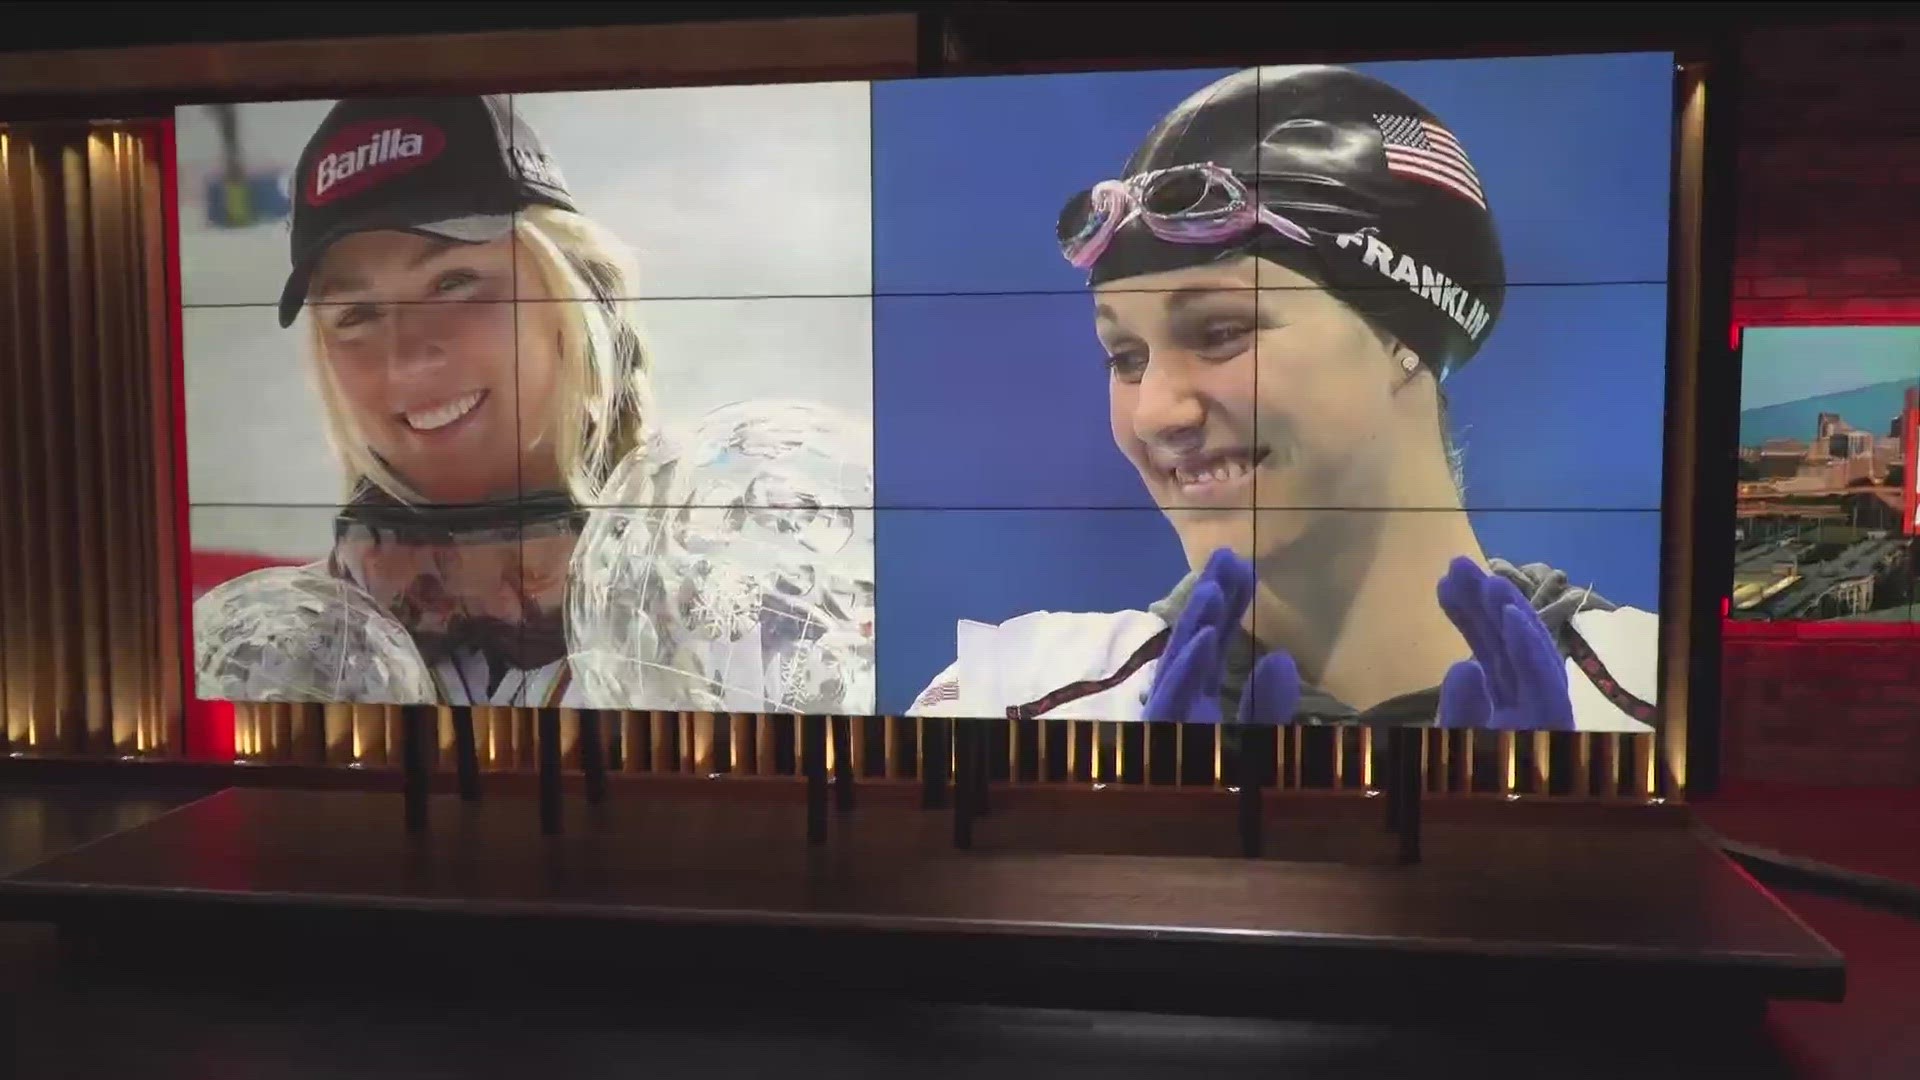 The skier and swimmer are some of the most decorated athletes in their sport.